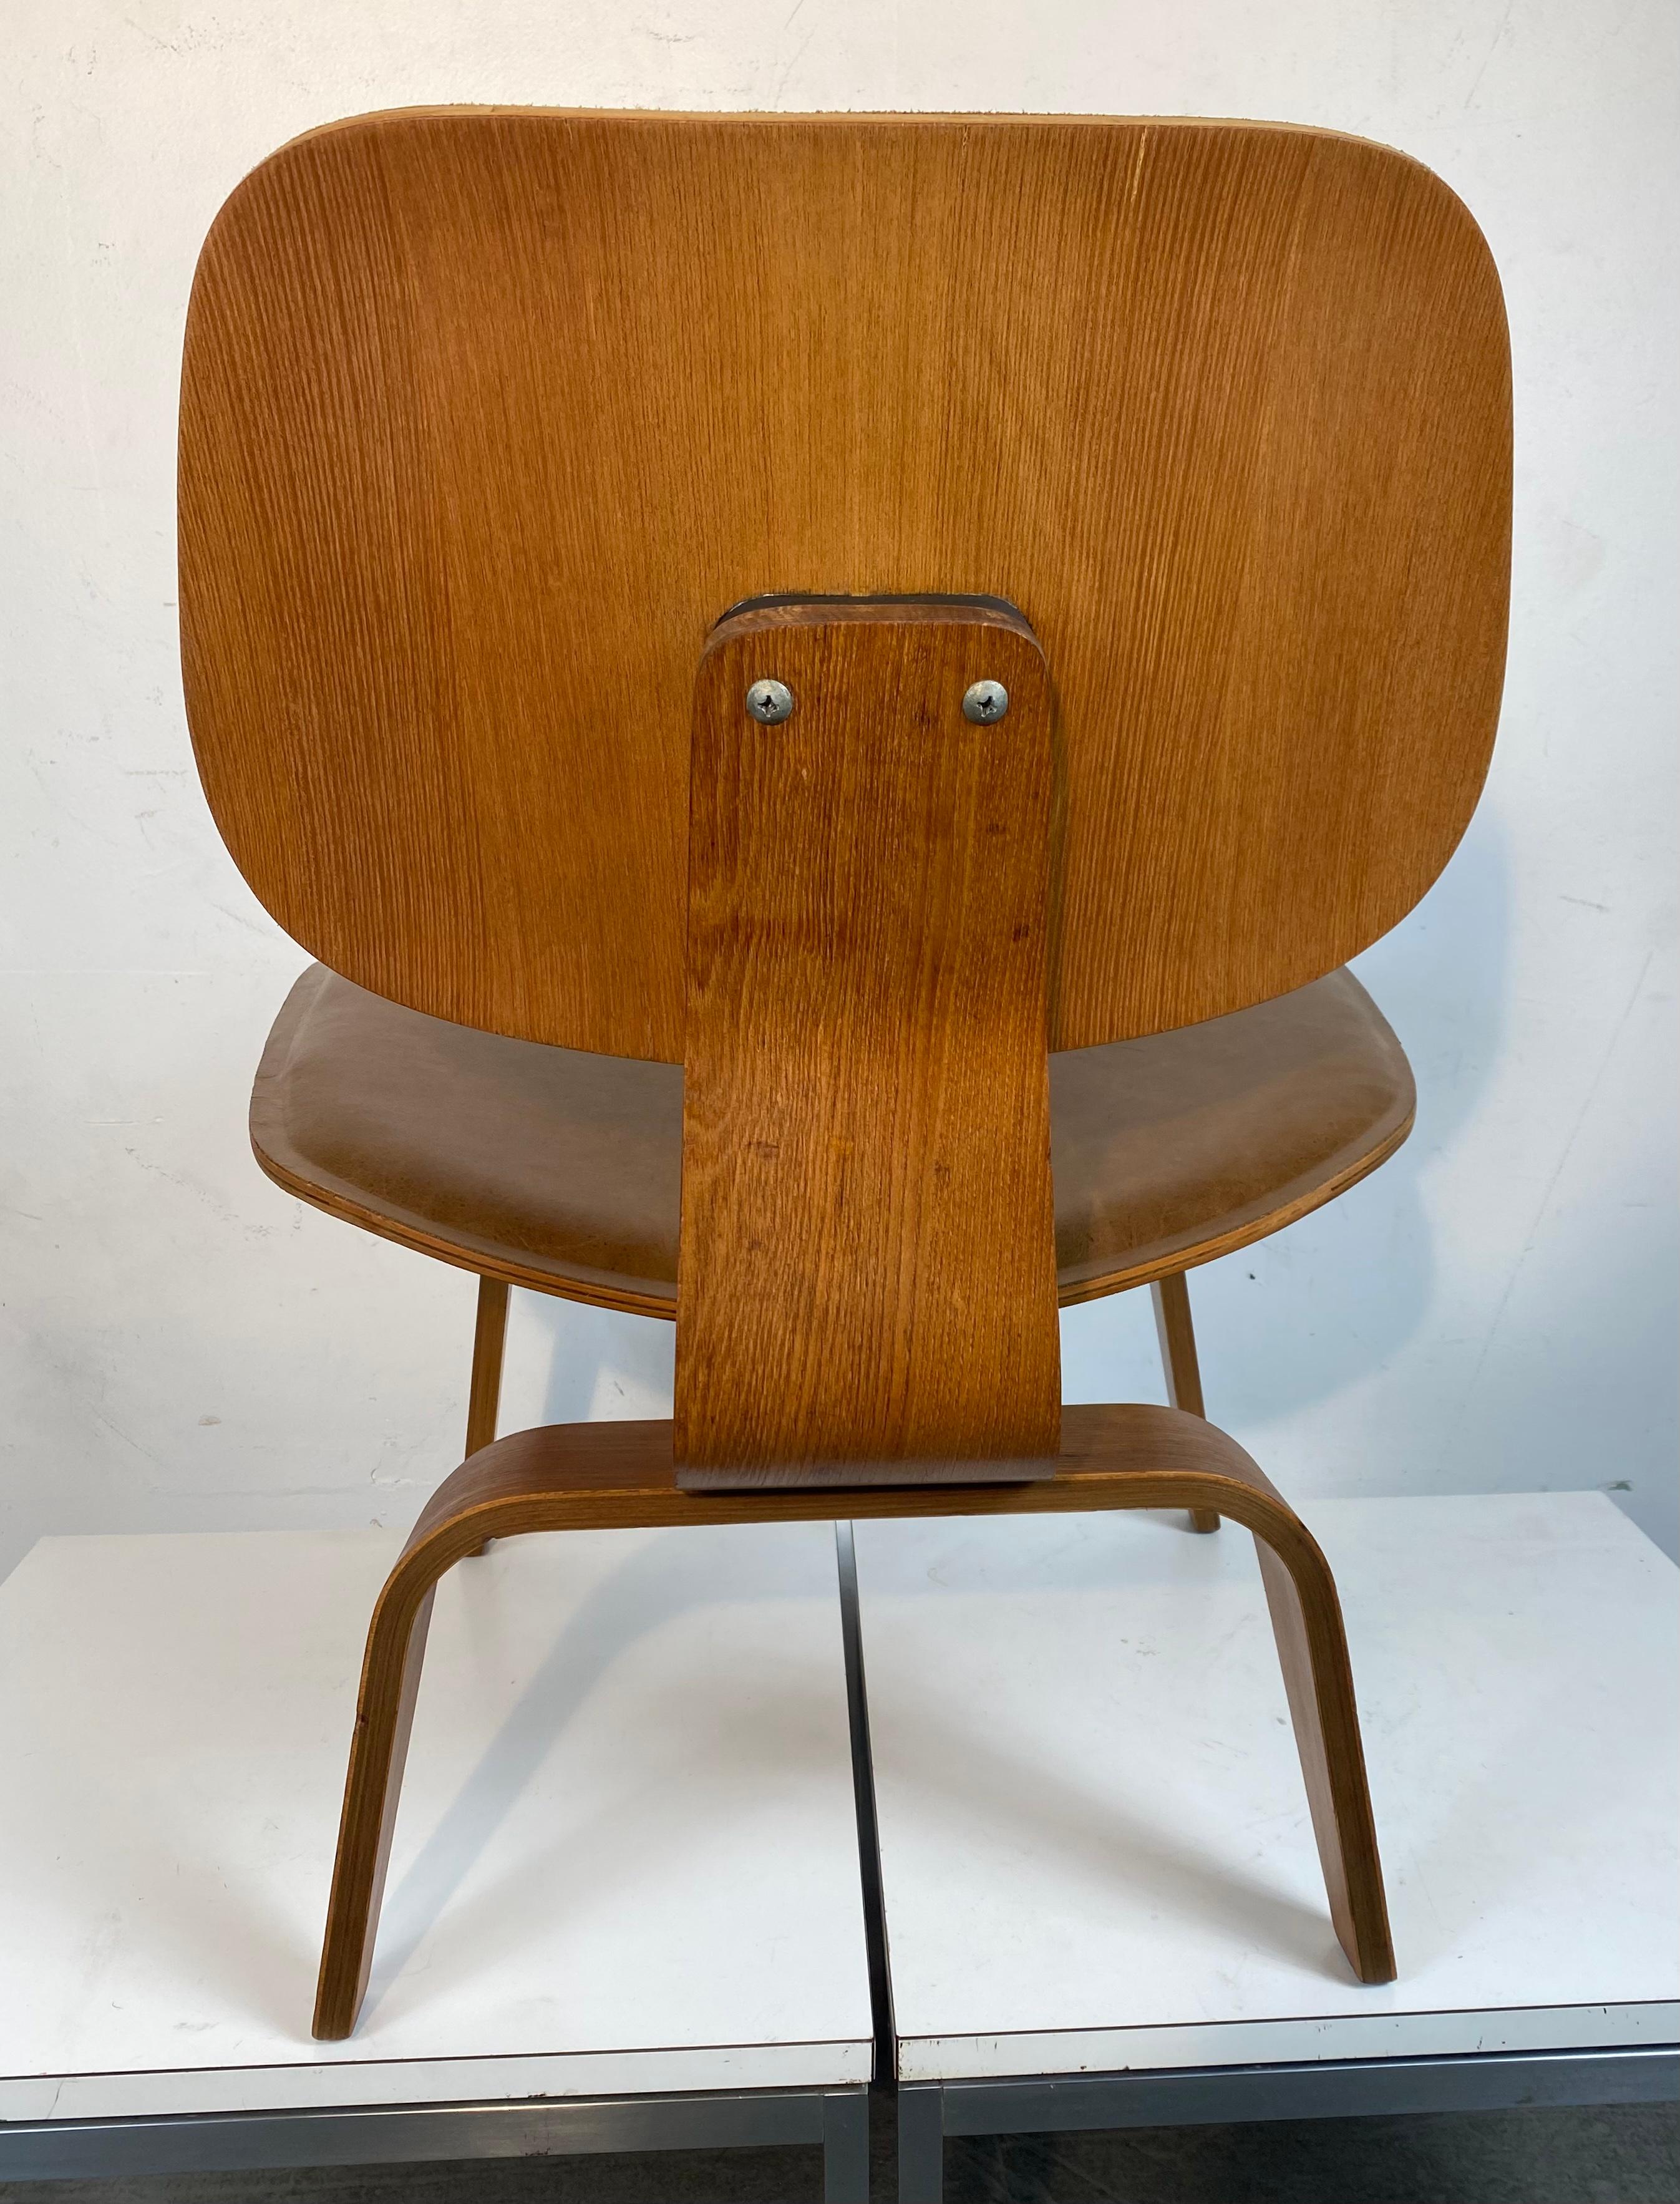 Mid-Century Modern Charles Eames L C W (LOUNGE CHAIR) Leather seat and back, Modernist Herman Miller